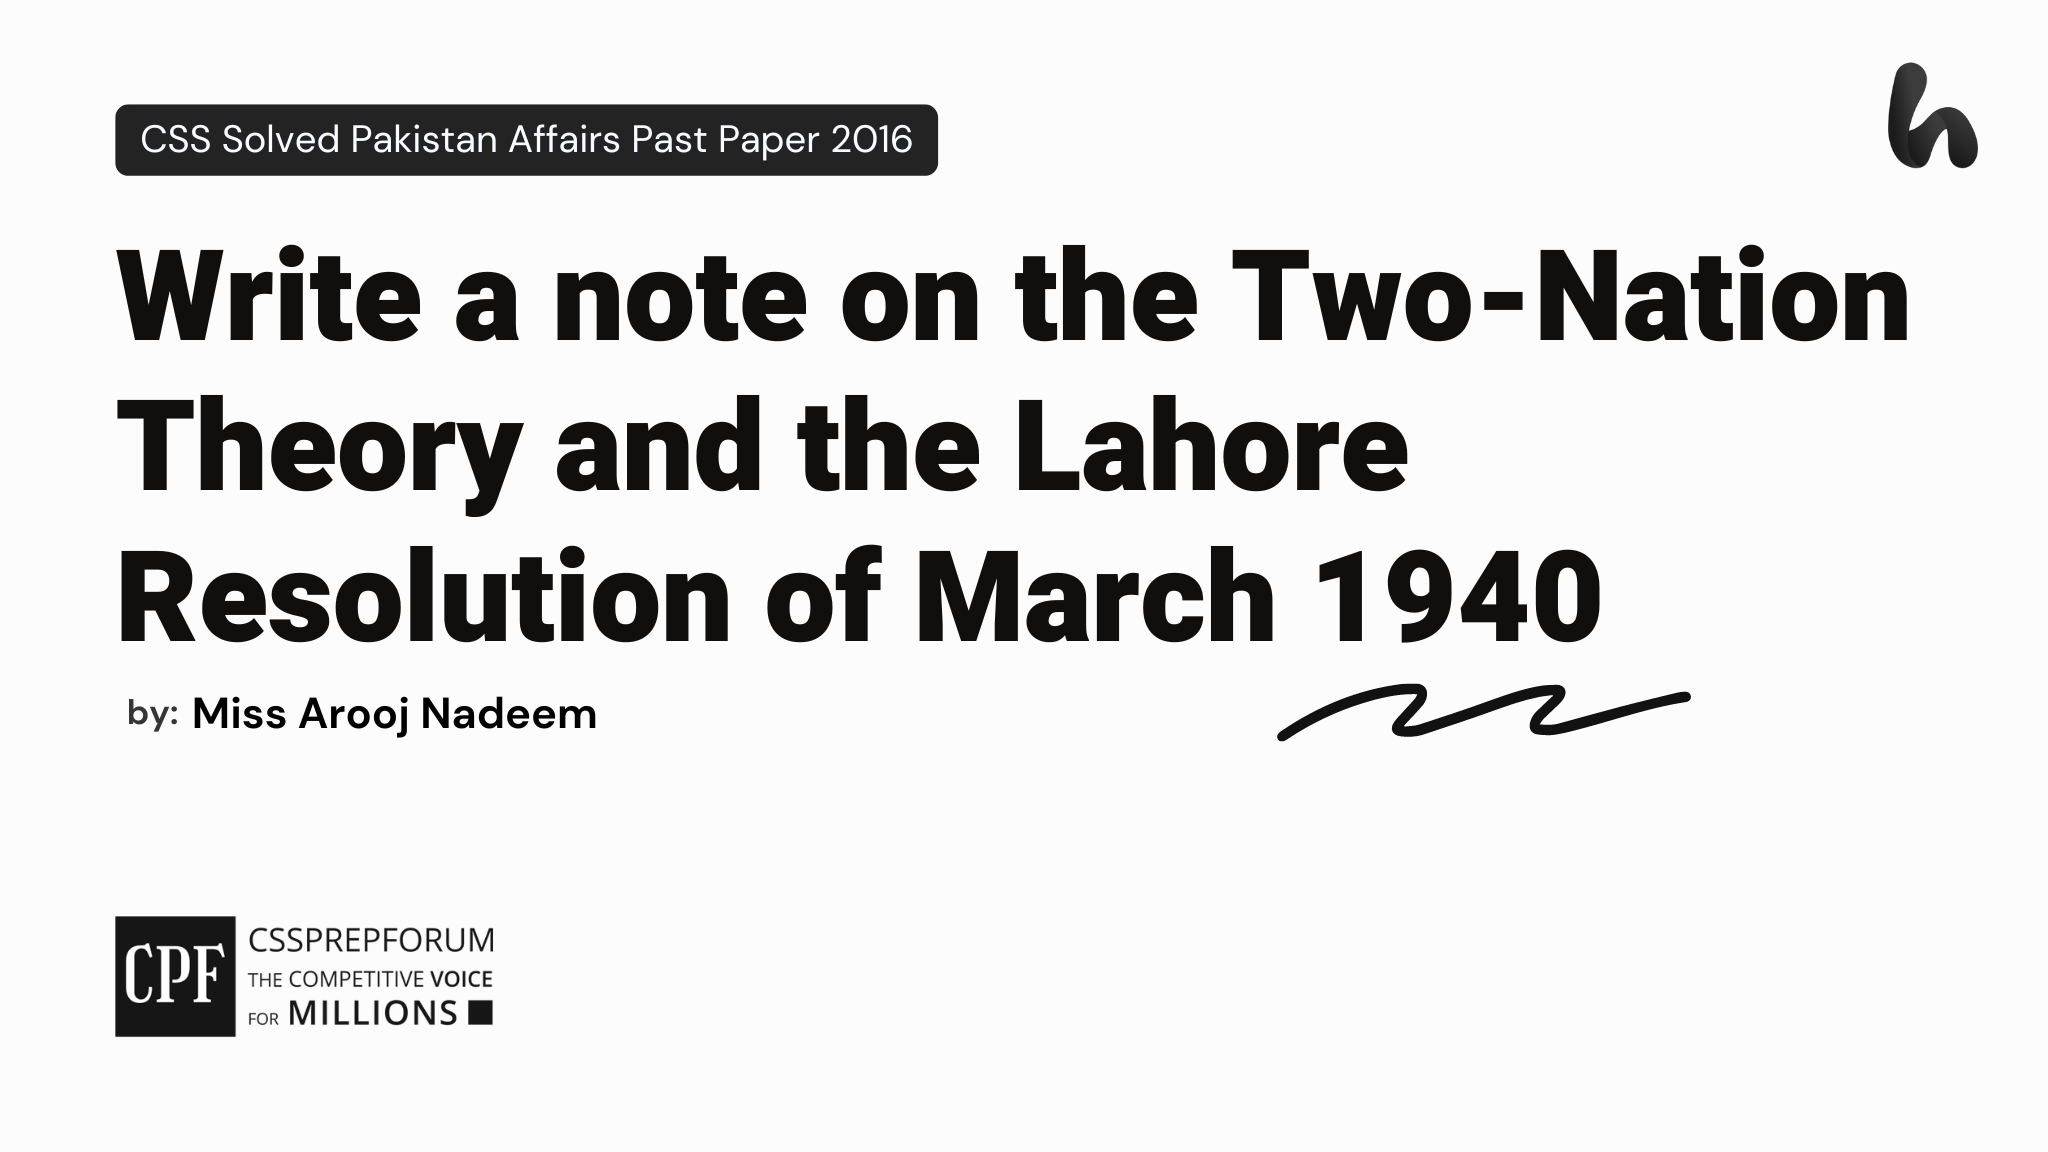 Write a note on the Two-Nation Theory and the Lahore Resolution of March 1940